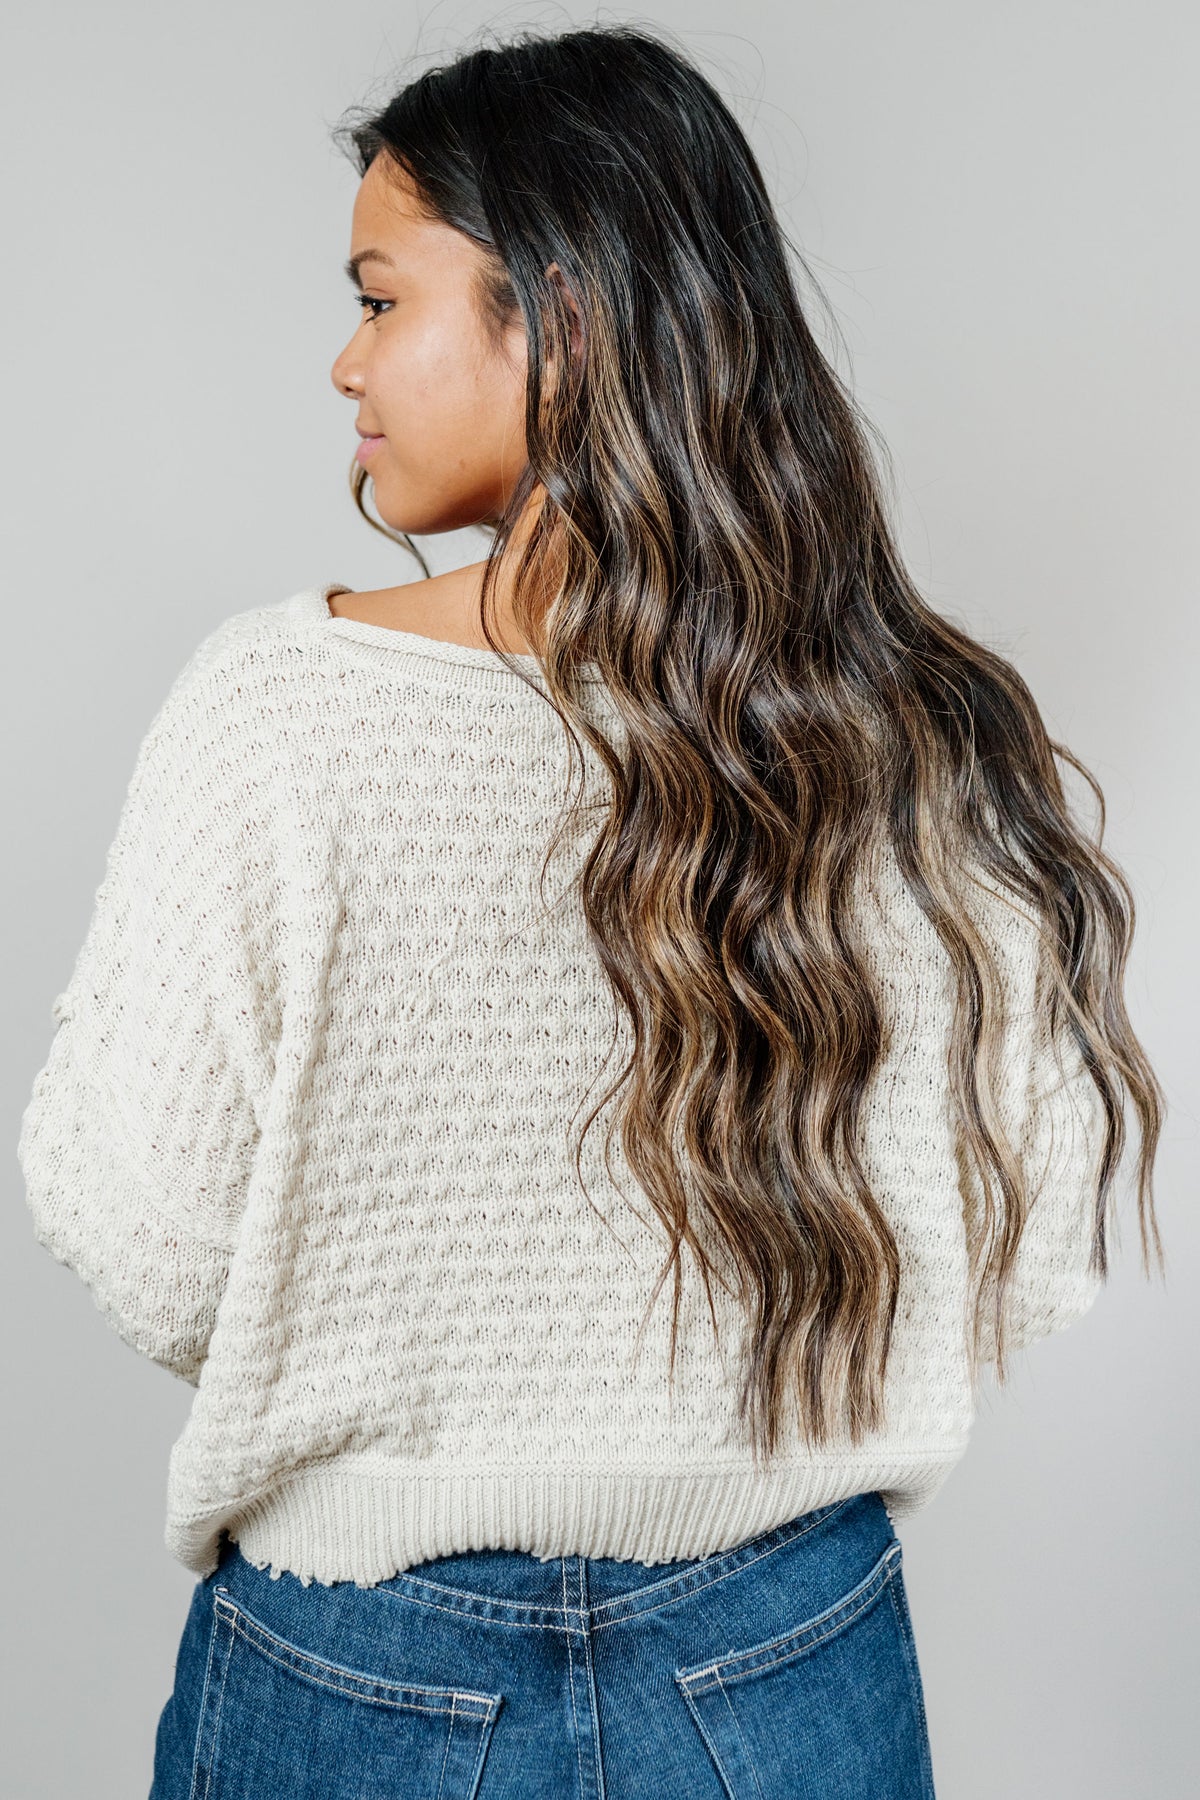 Casual Cozy Knit Sweater